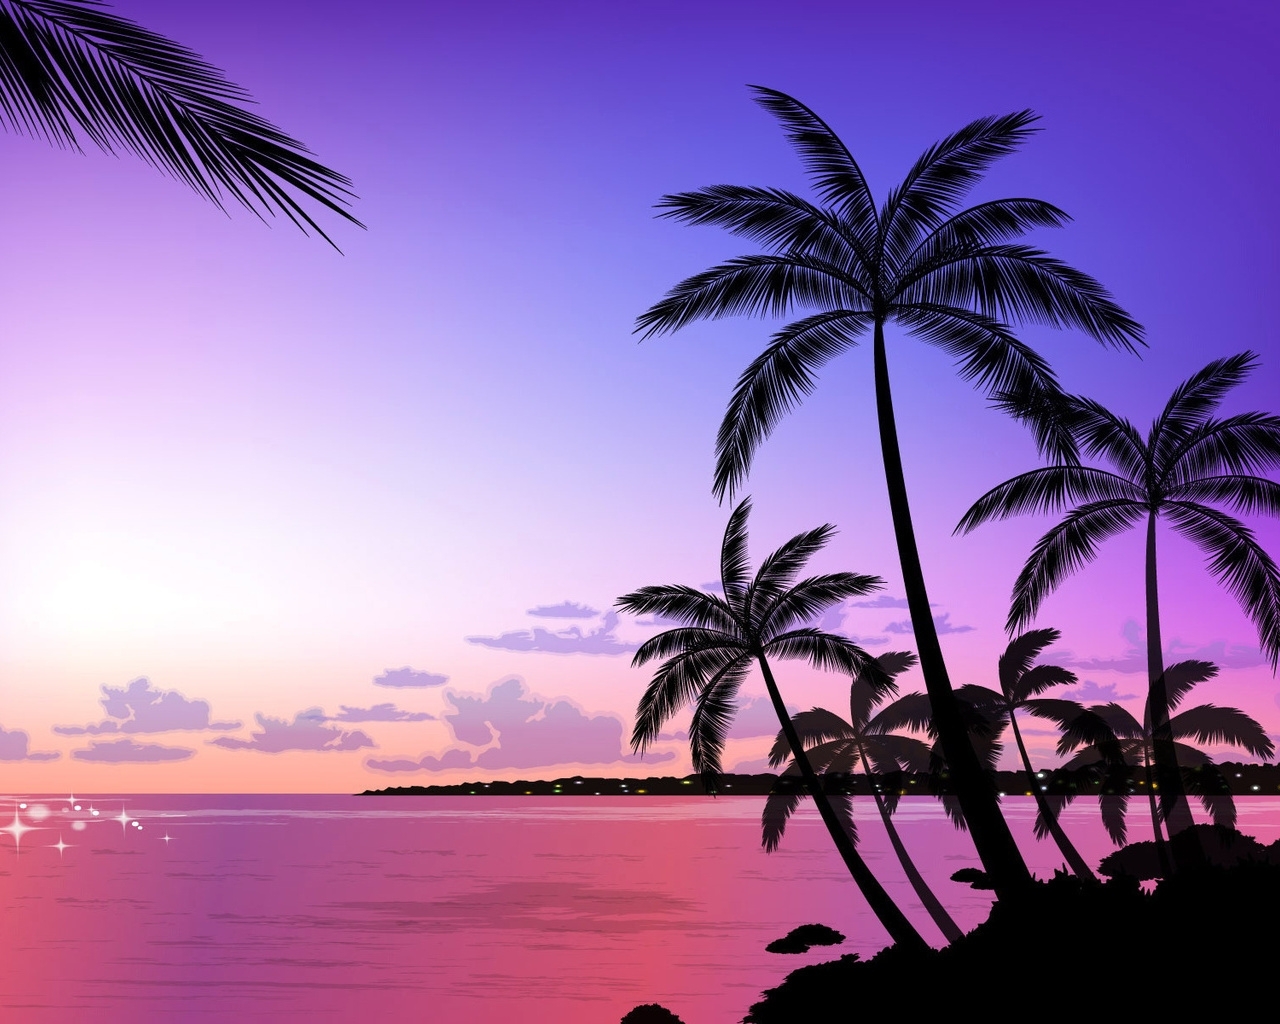 pictures, landscape, sunset, palms lock screen backgrounds